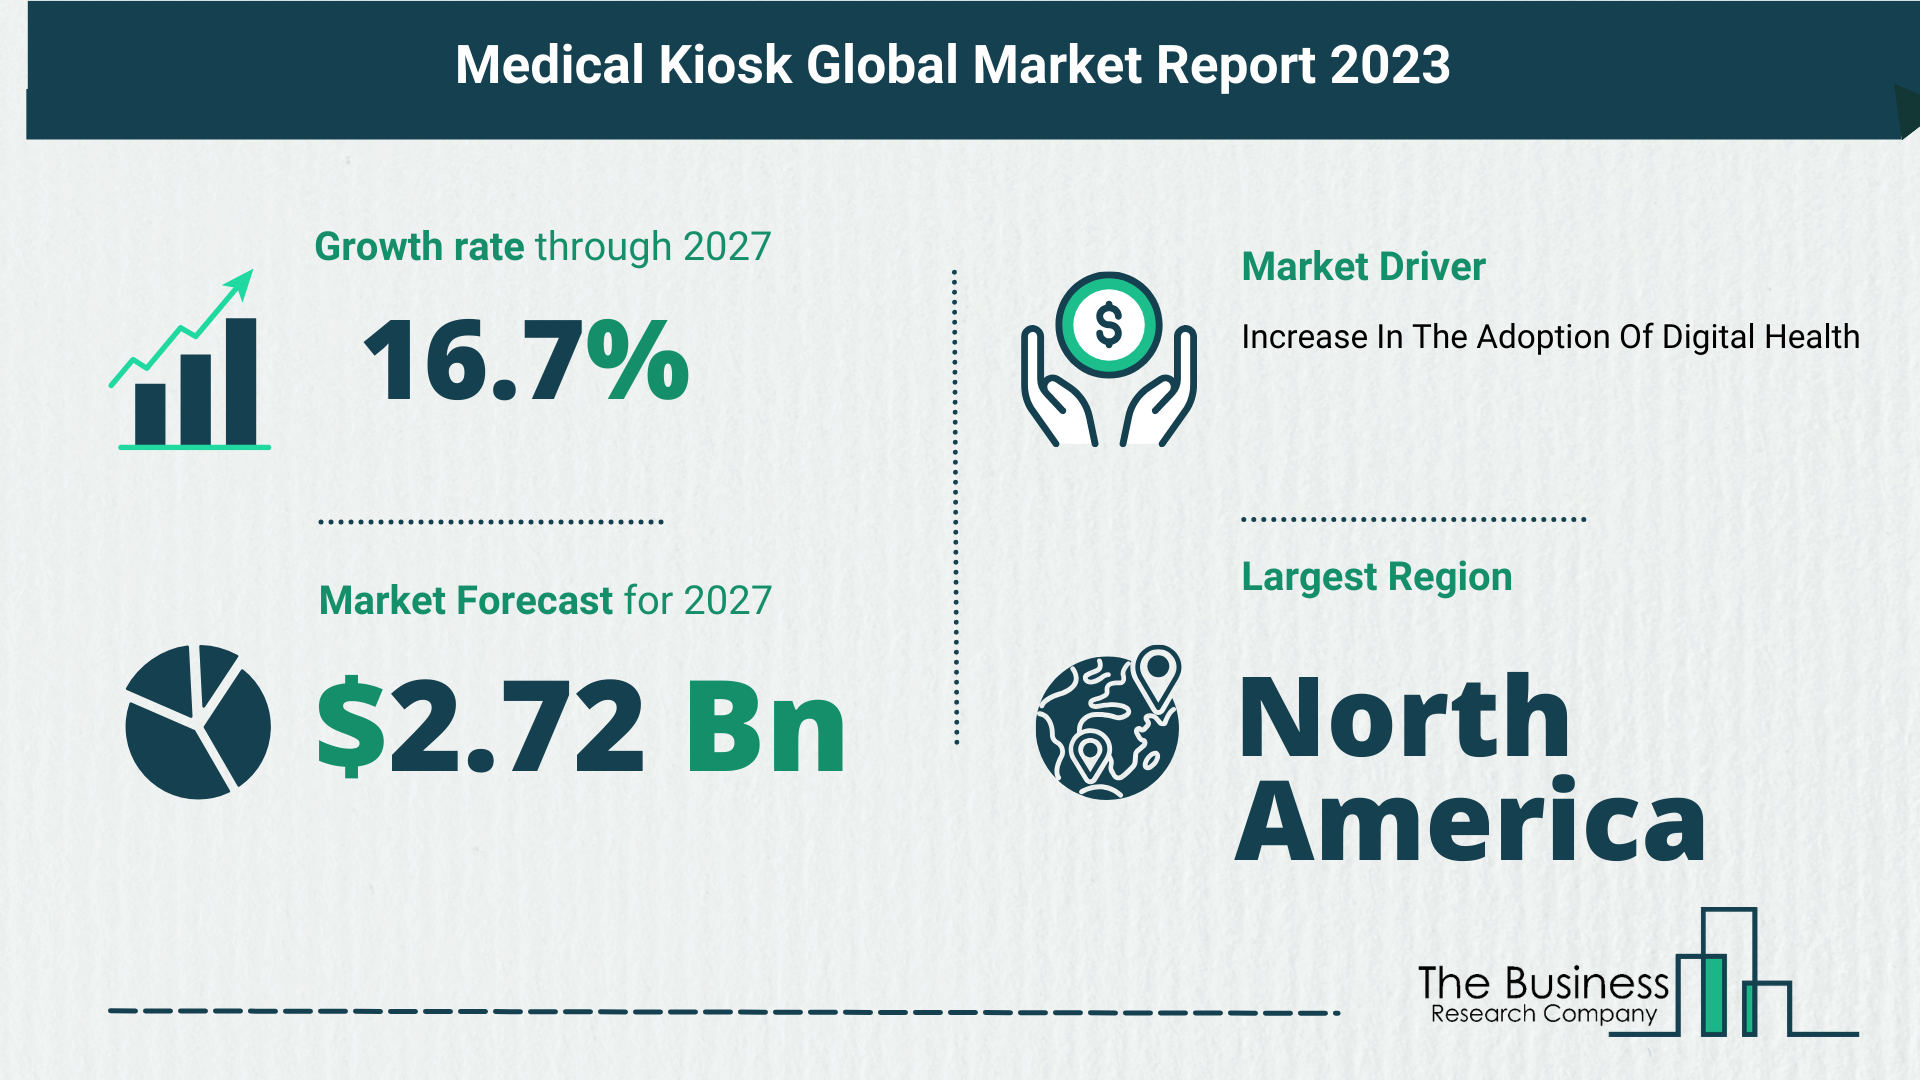 How Is The Medical Kiosk Market Expected To Grow Through 2023-2032